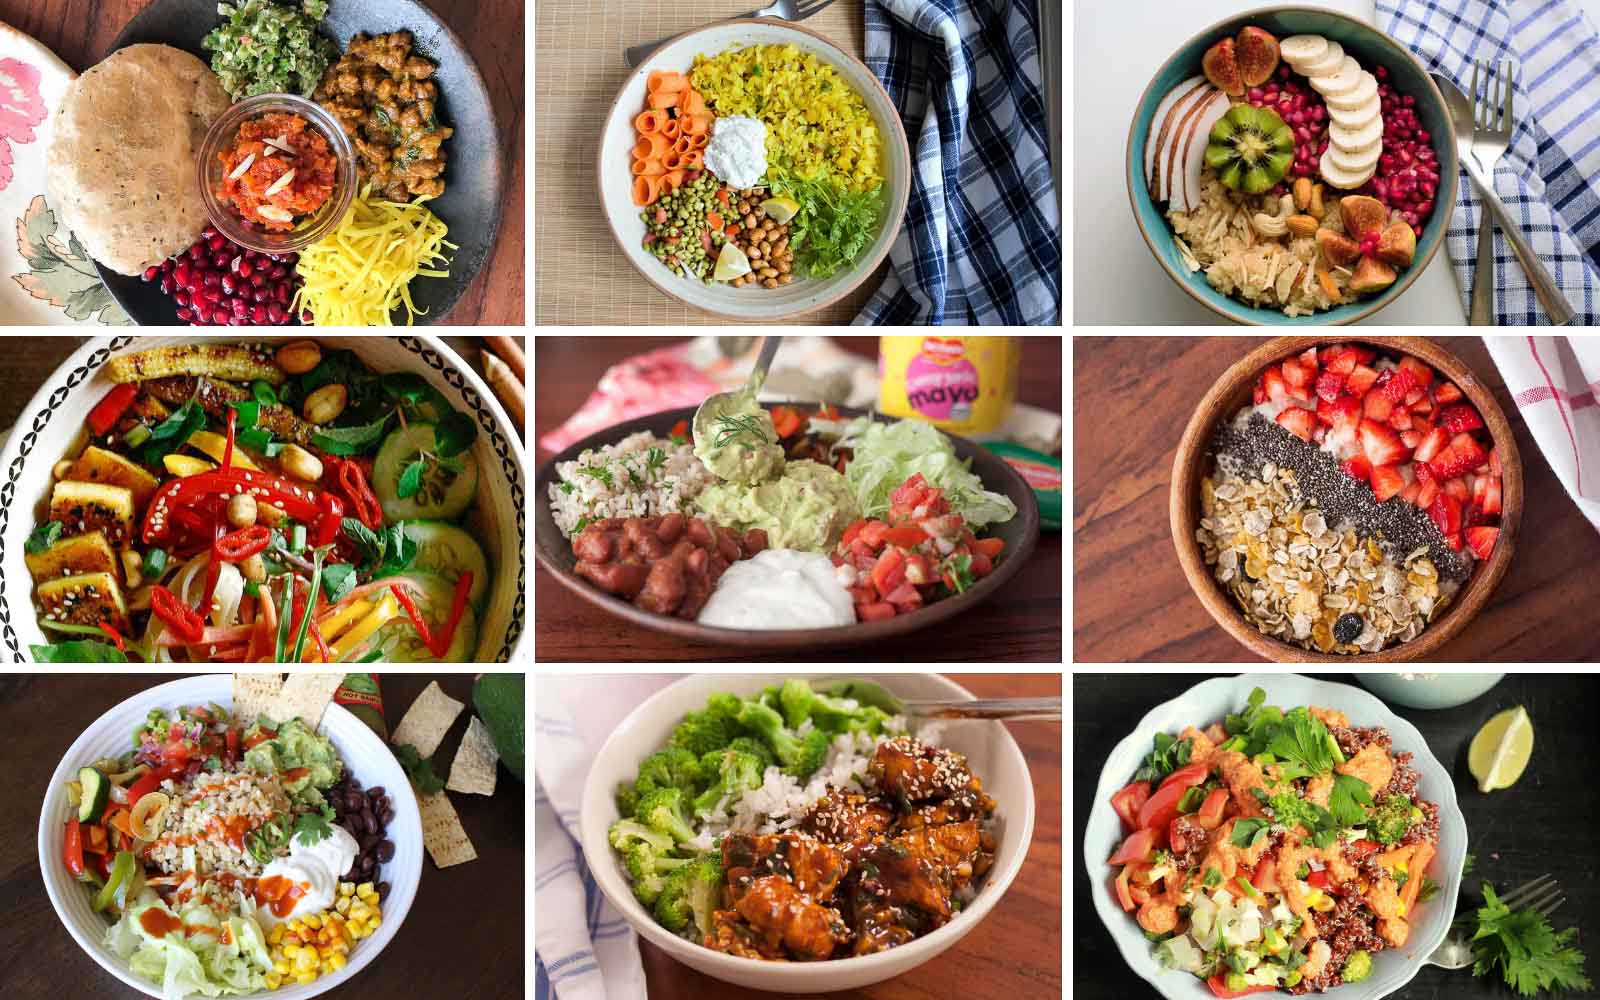 18 Meal Bowls You Can Serve For Breakfast, Lunch Or Dinner by